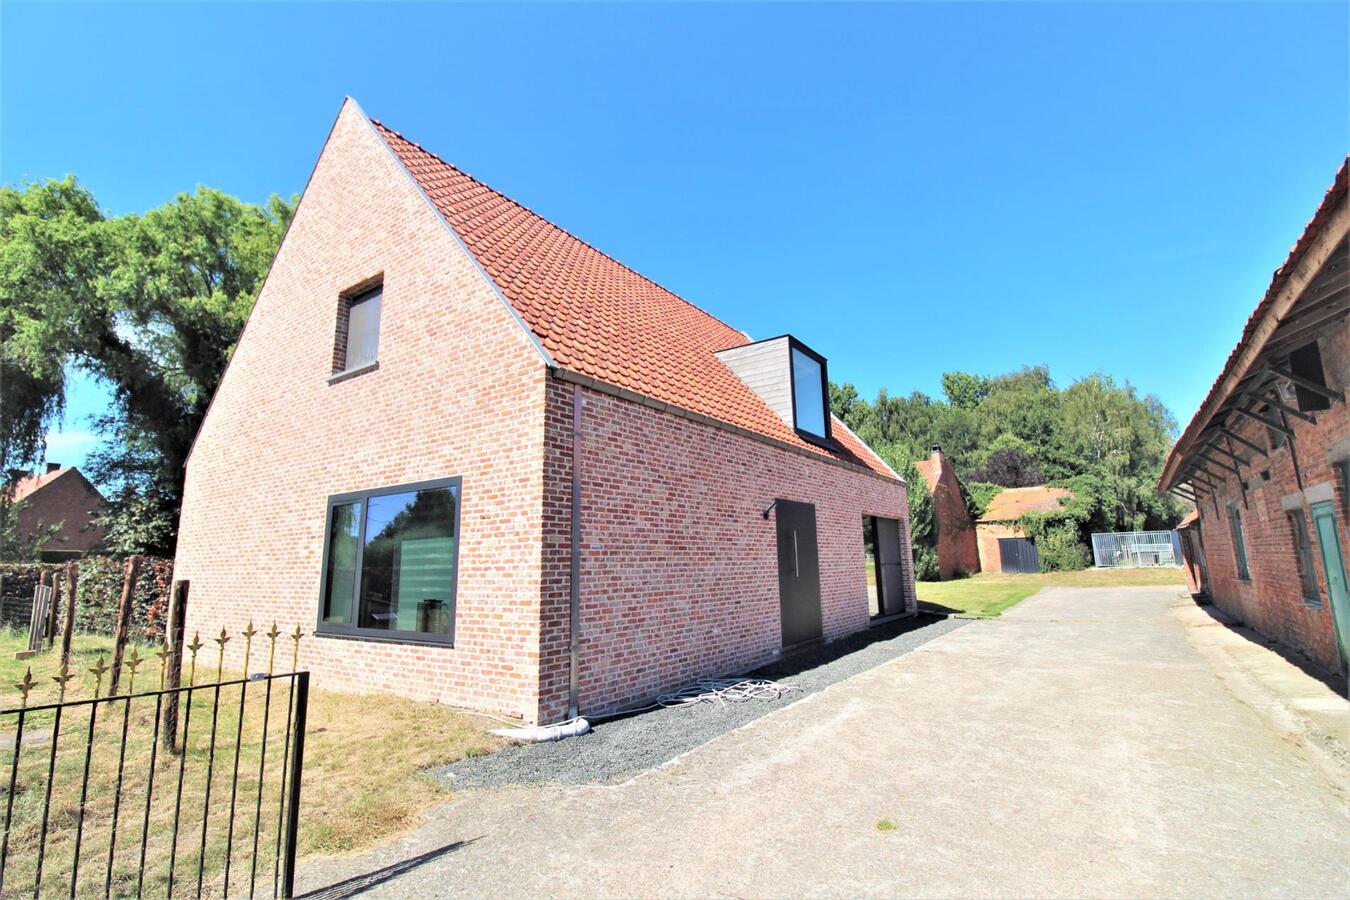 Property sold in Waasmunster